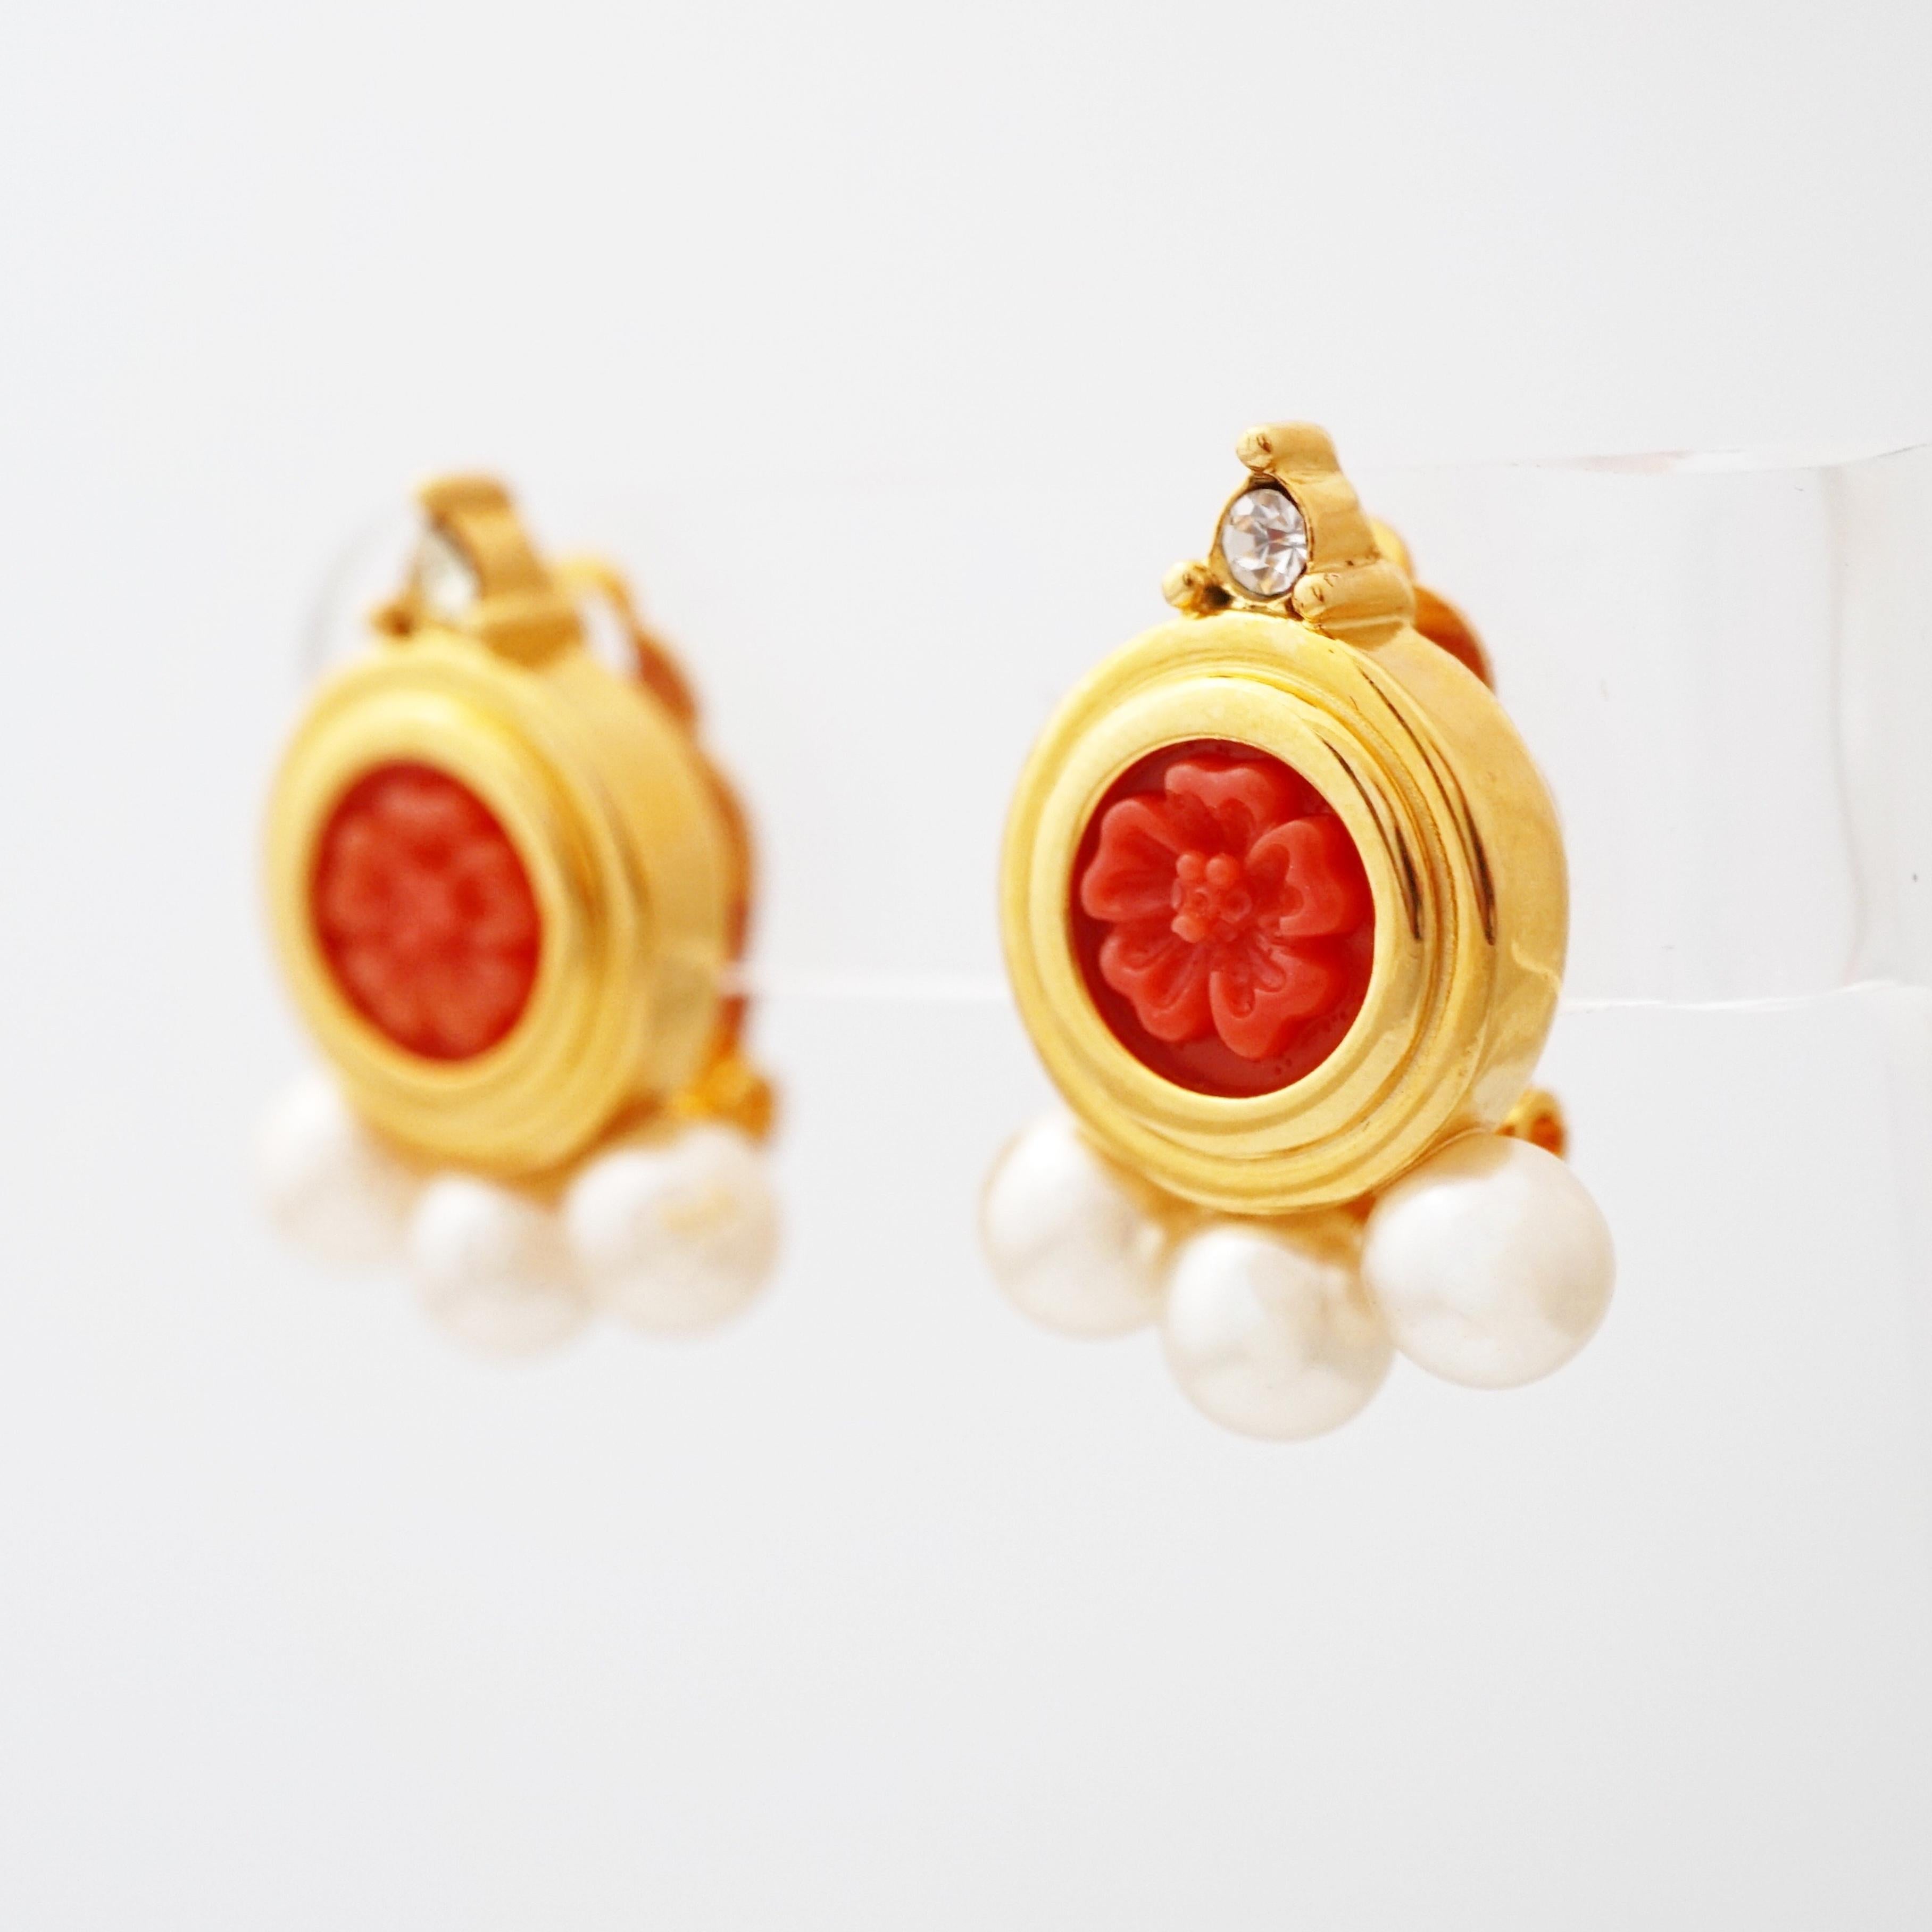 Modern Carved Faux Coral Earrings With Pearl Details By Joan Rivers, 1990s